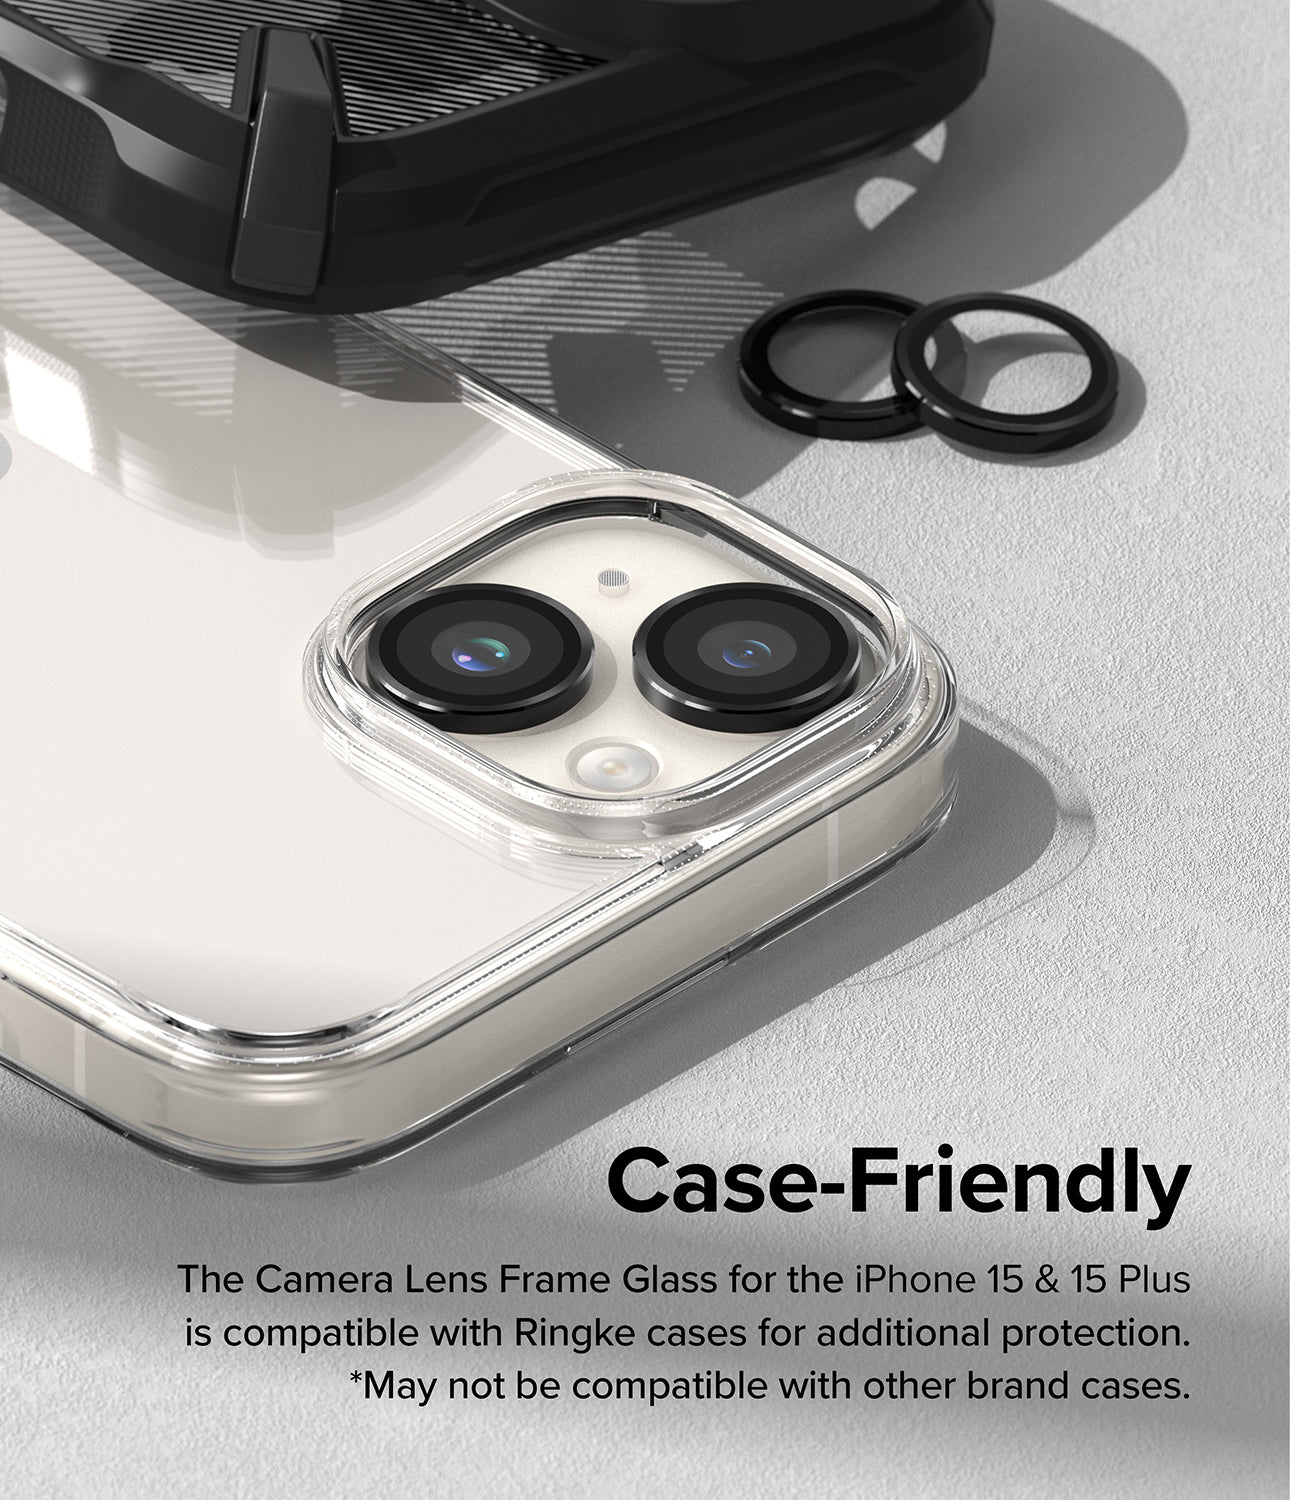 iPhone 15 Plus / iPhone 15 | Camera Lens Frame Glass - Case-Friendly. The Camera Lens Frame Glass for the iPhone 15 and 15 Plus is compatible with Ringke cases for additional protection. May not be compatible with other brand cases..